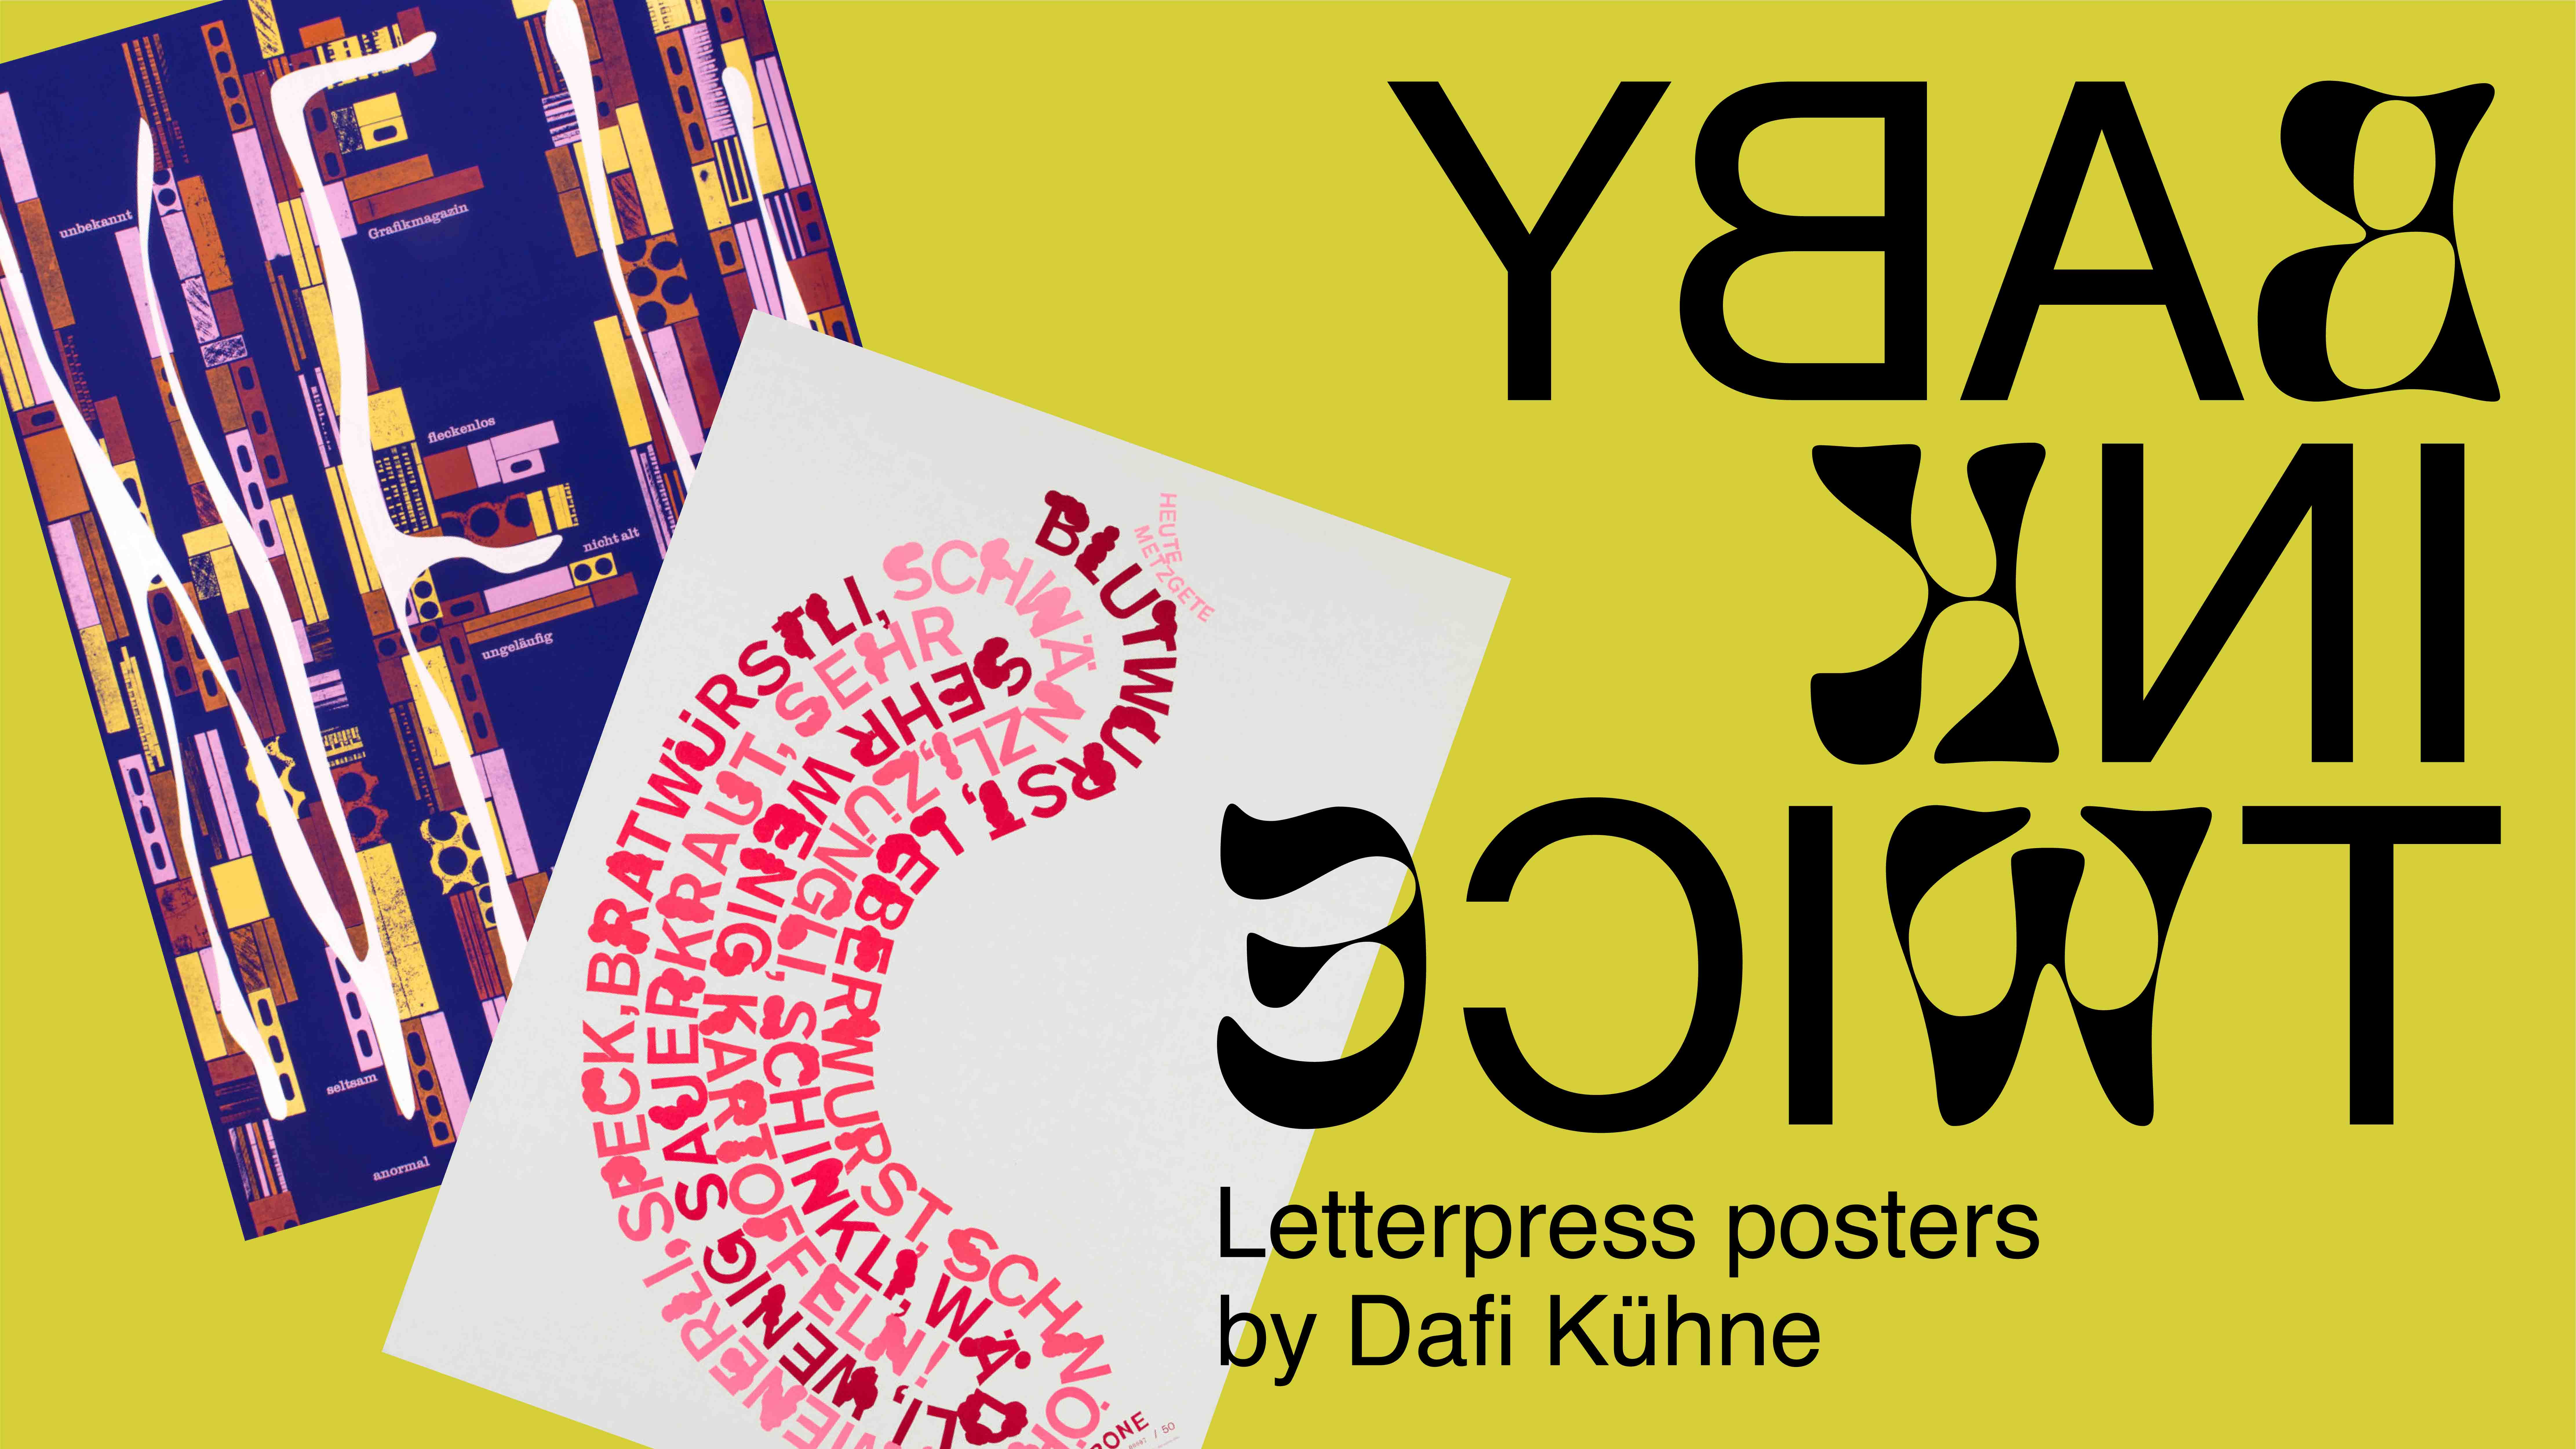 Letterpress Posters by Dafi Kühne will be on display January 4 through March 15, 2022 at the HMCT South Campus Gallery.